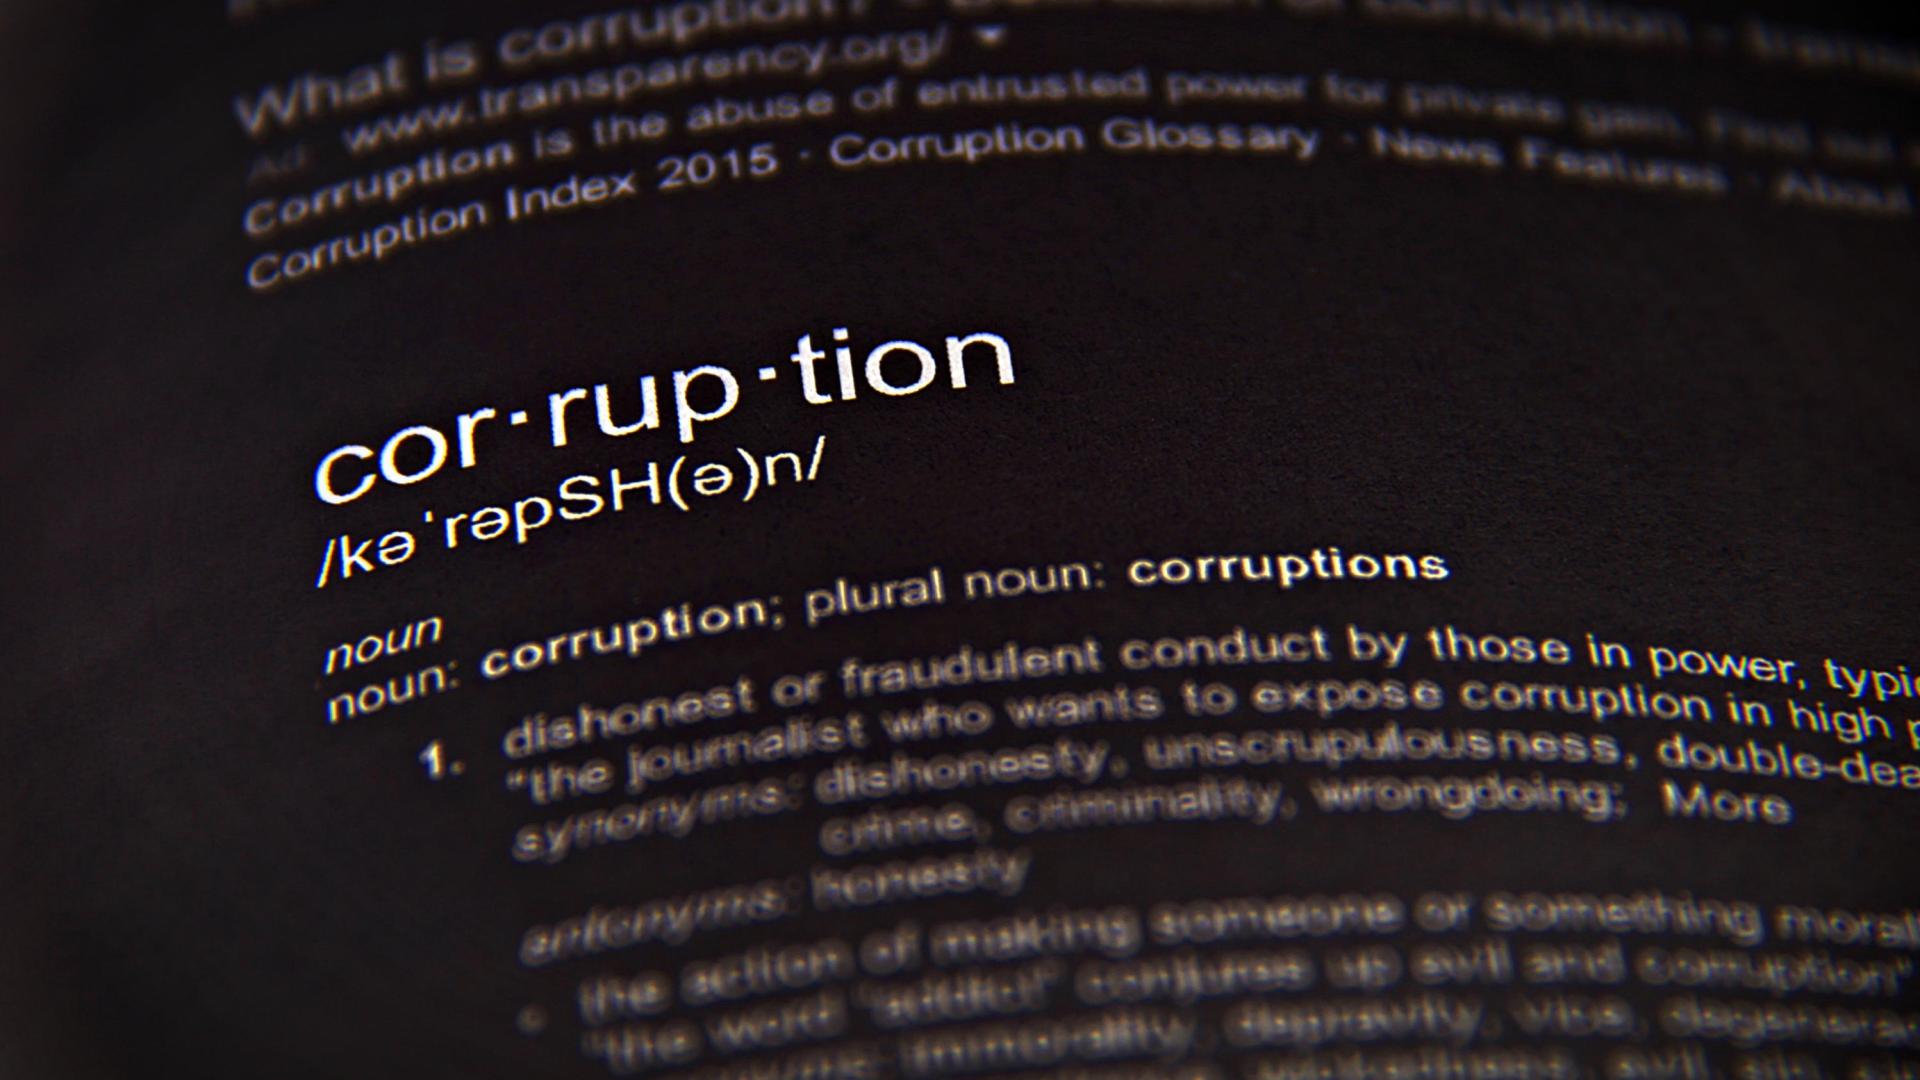 DCU’s Anti-Corruption Research centre has been awarded €319,258.27 through the Irish Research Council 